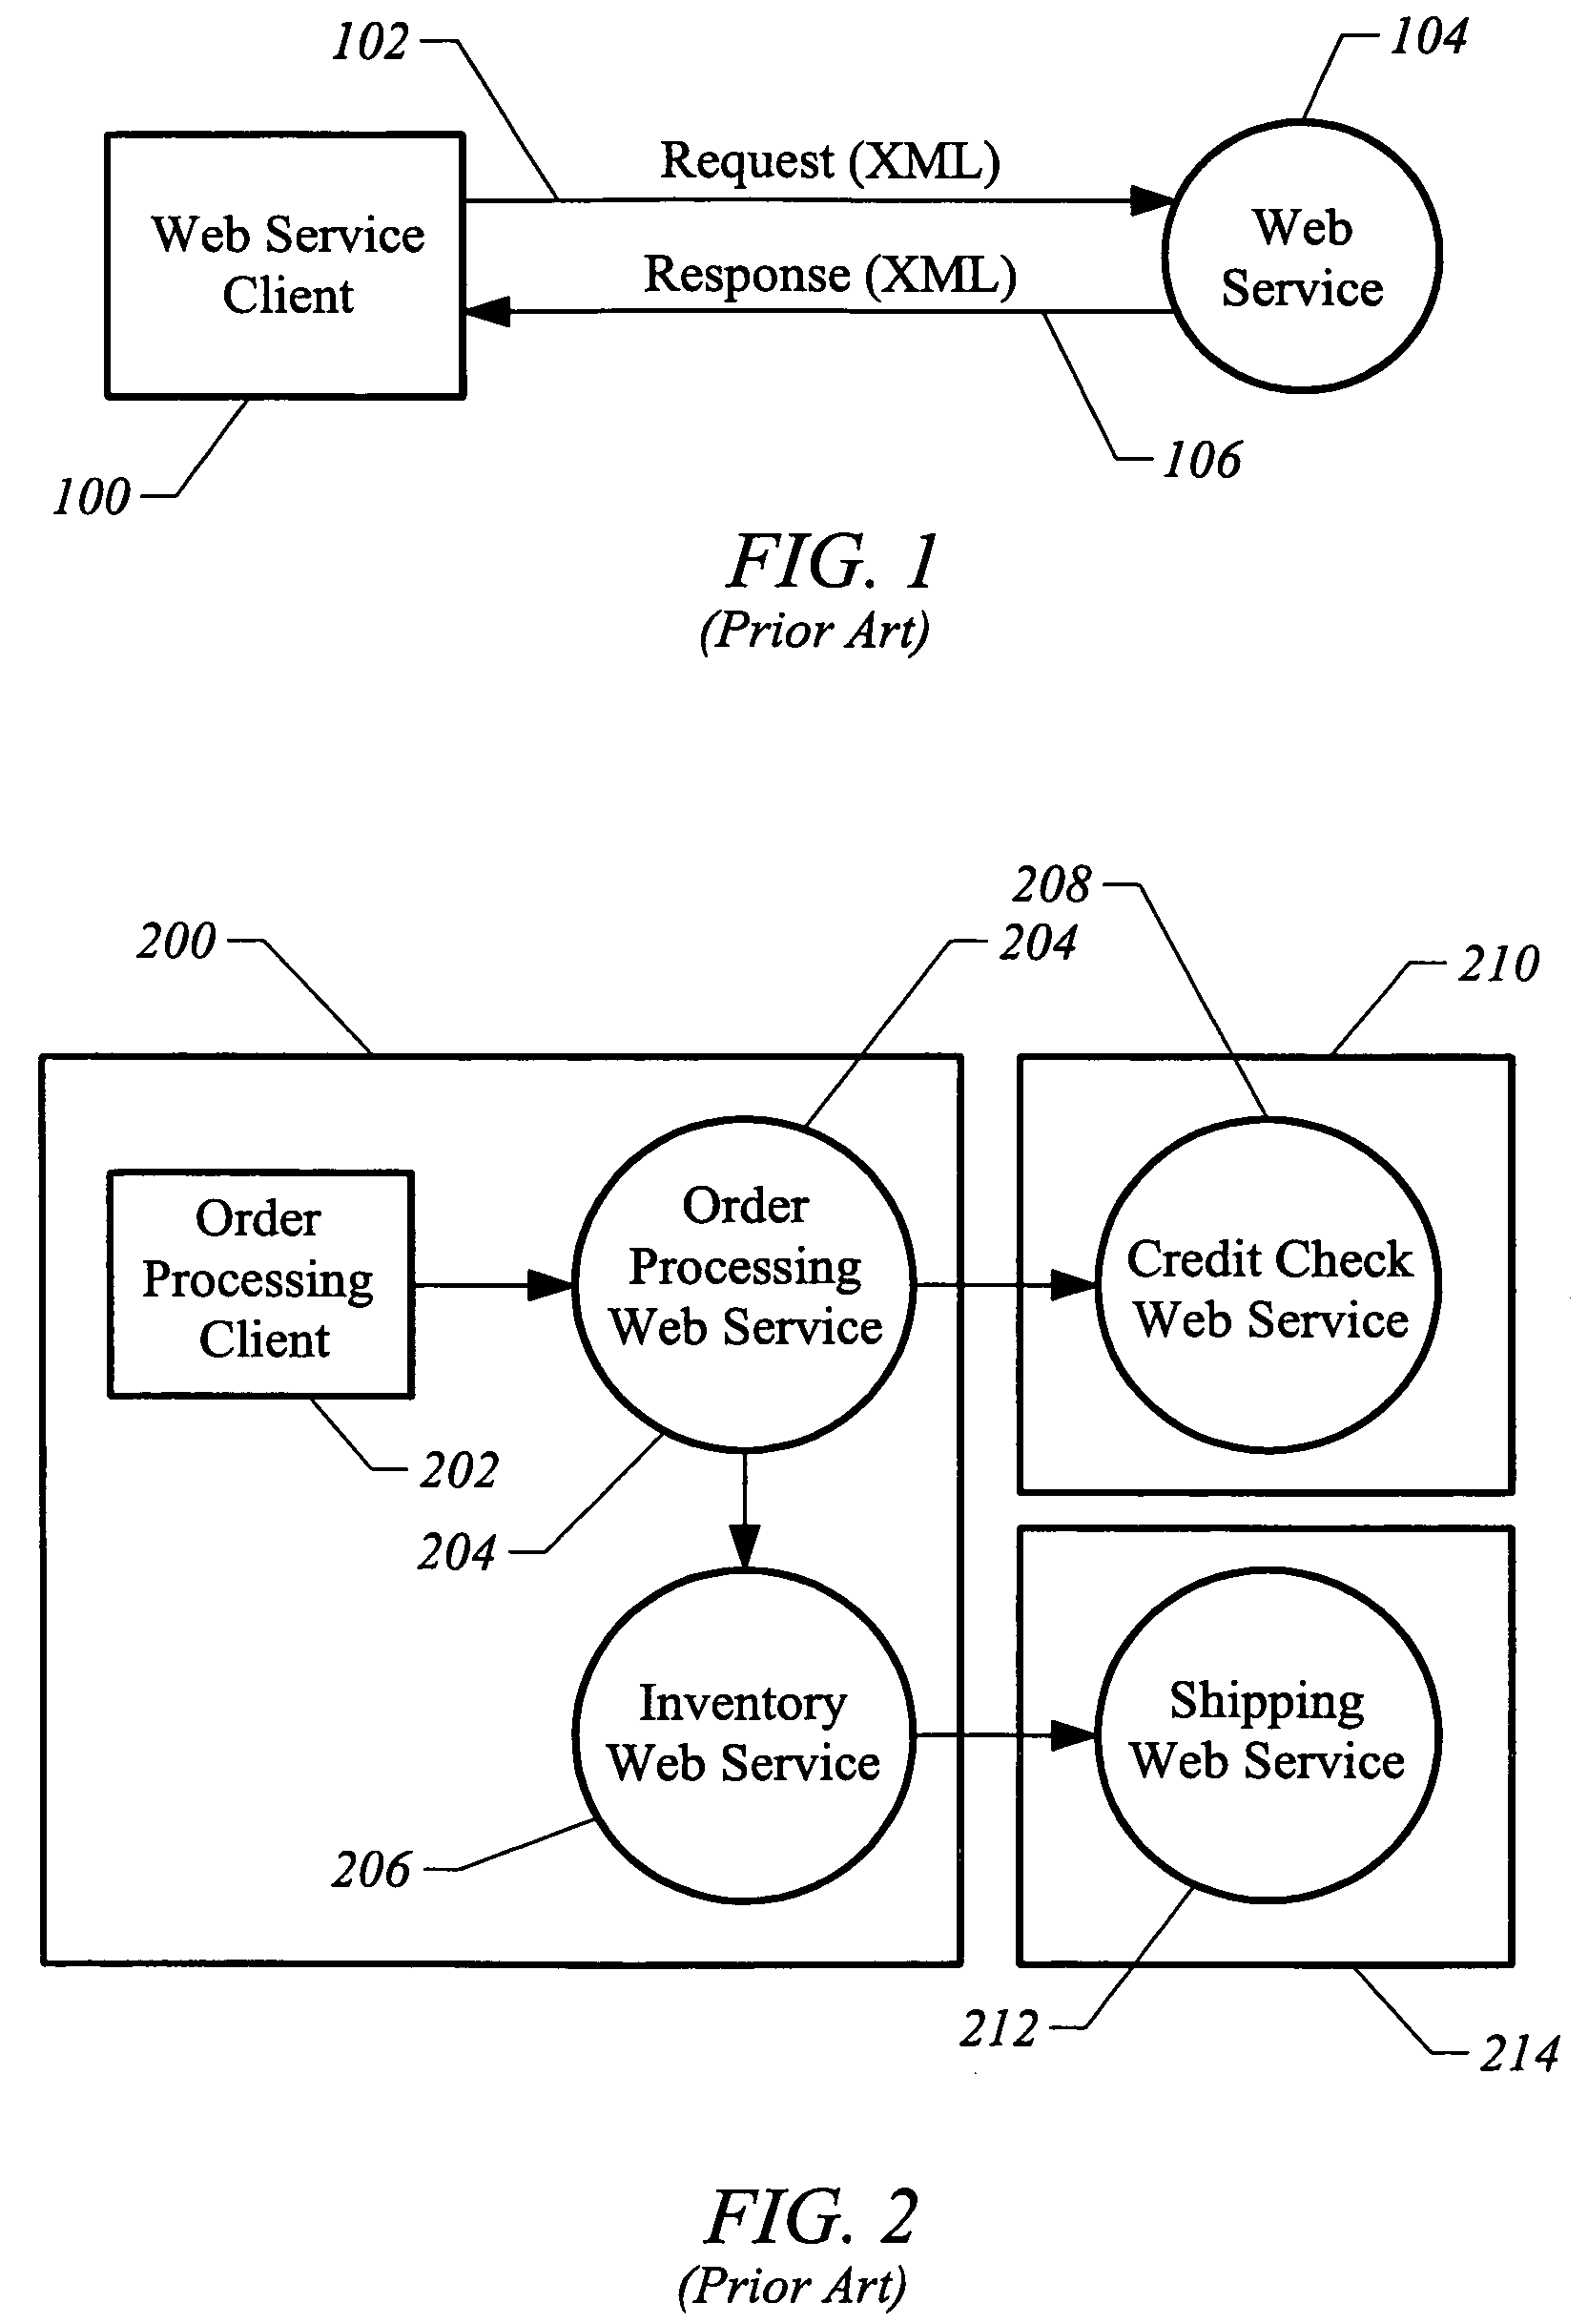 Apparatus and method for content and context processing of web service traffic